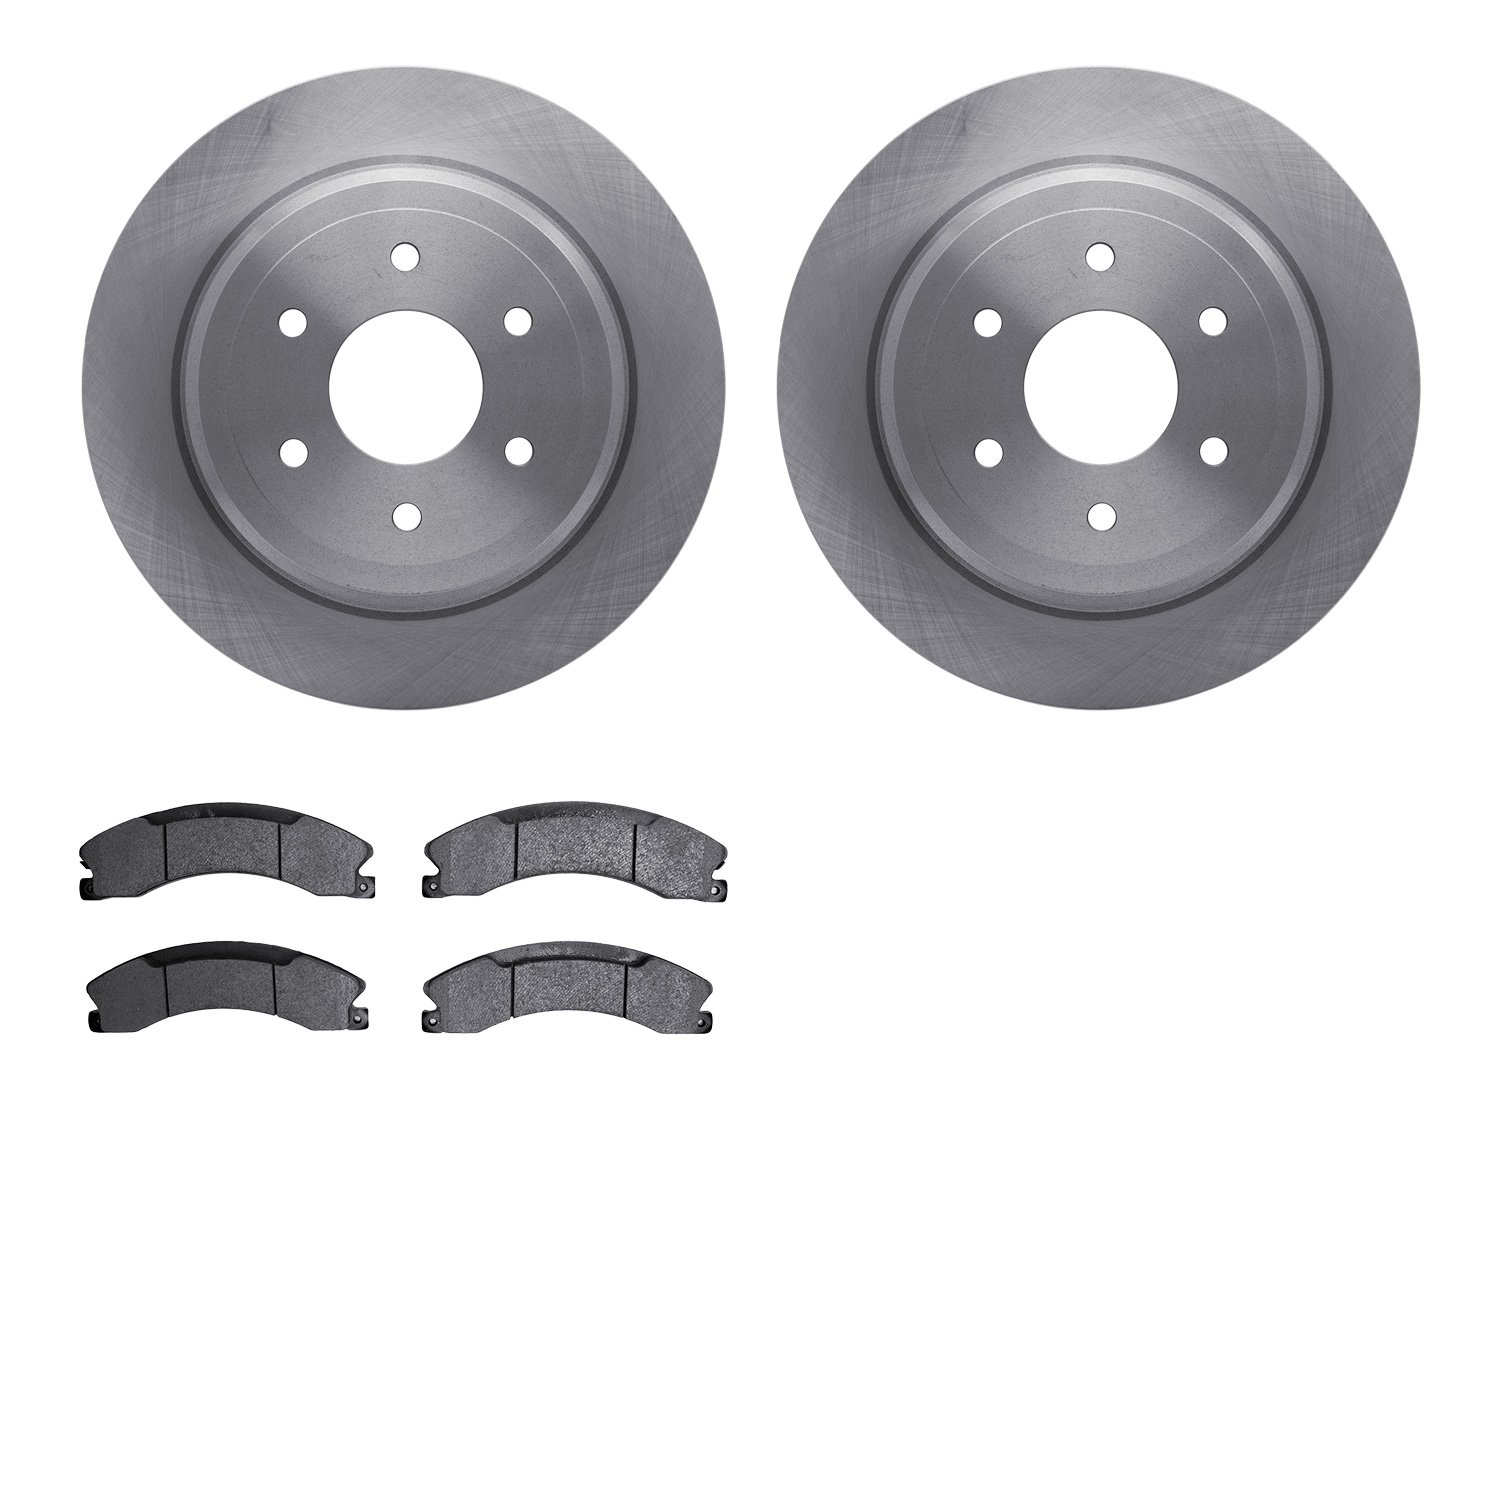 6402-67025 Brake Rotors with Ultimate-Duty Brake Pads, Fits Select Infiniti/Nissan, Position: Rear